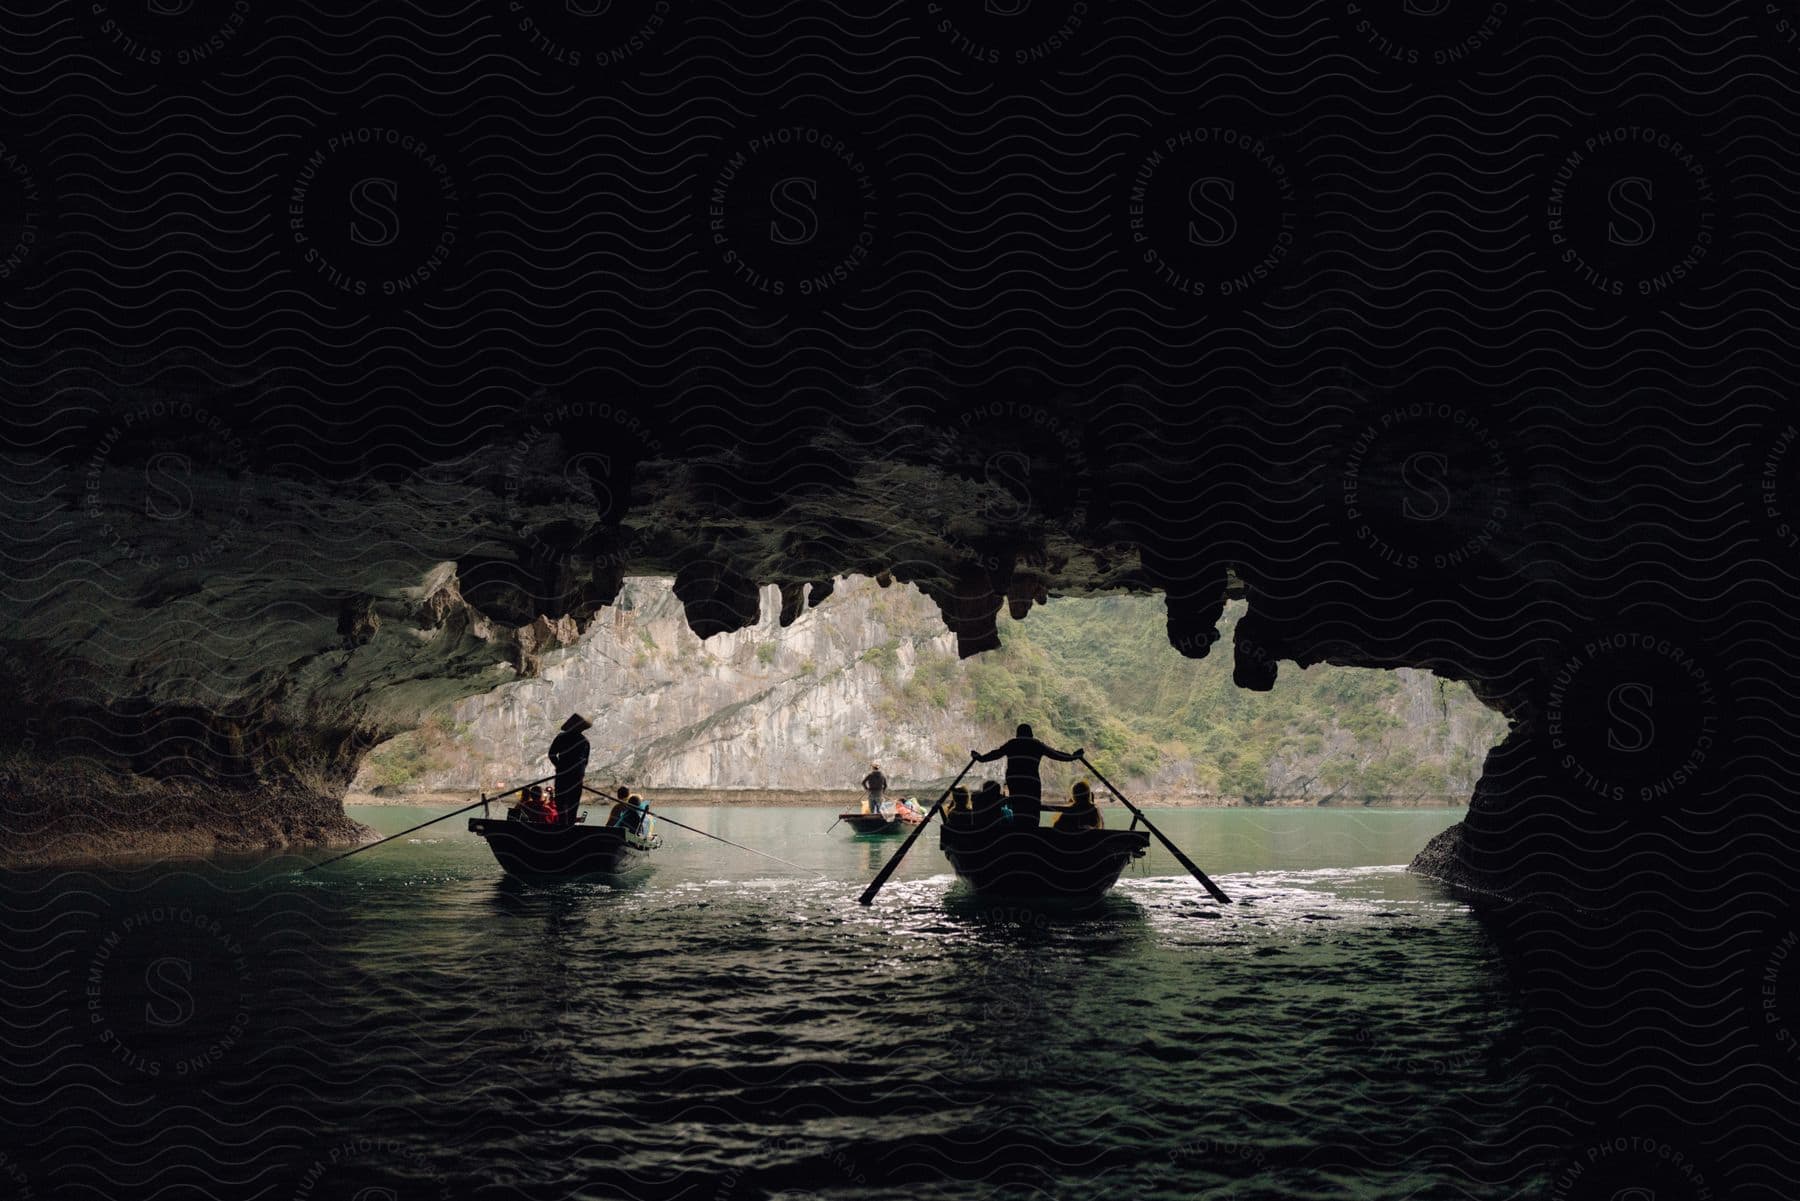 Silhouetted boats rowed by figures, navigating through a dark, cavernous waterway with rocky overhead formations, illuminated by natural light at the entrance.